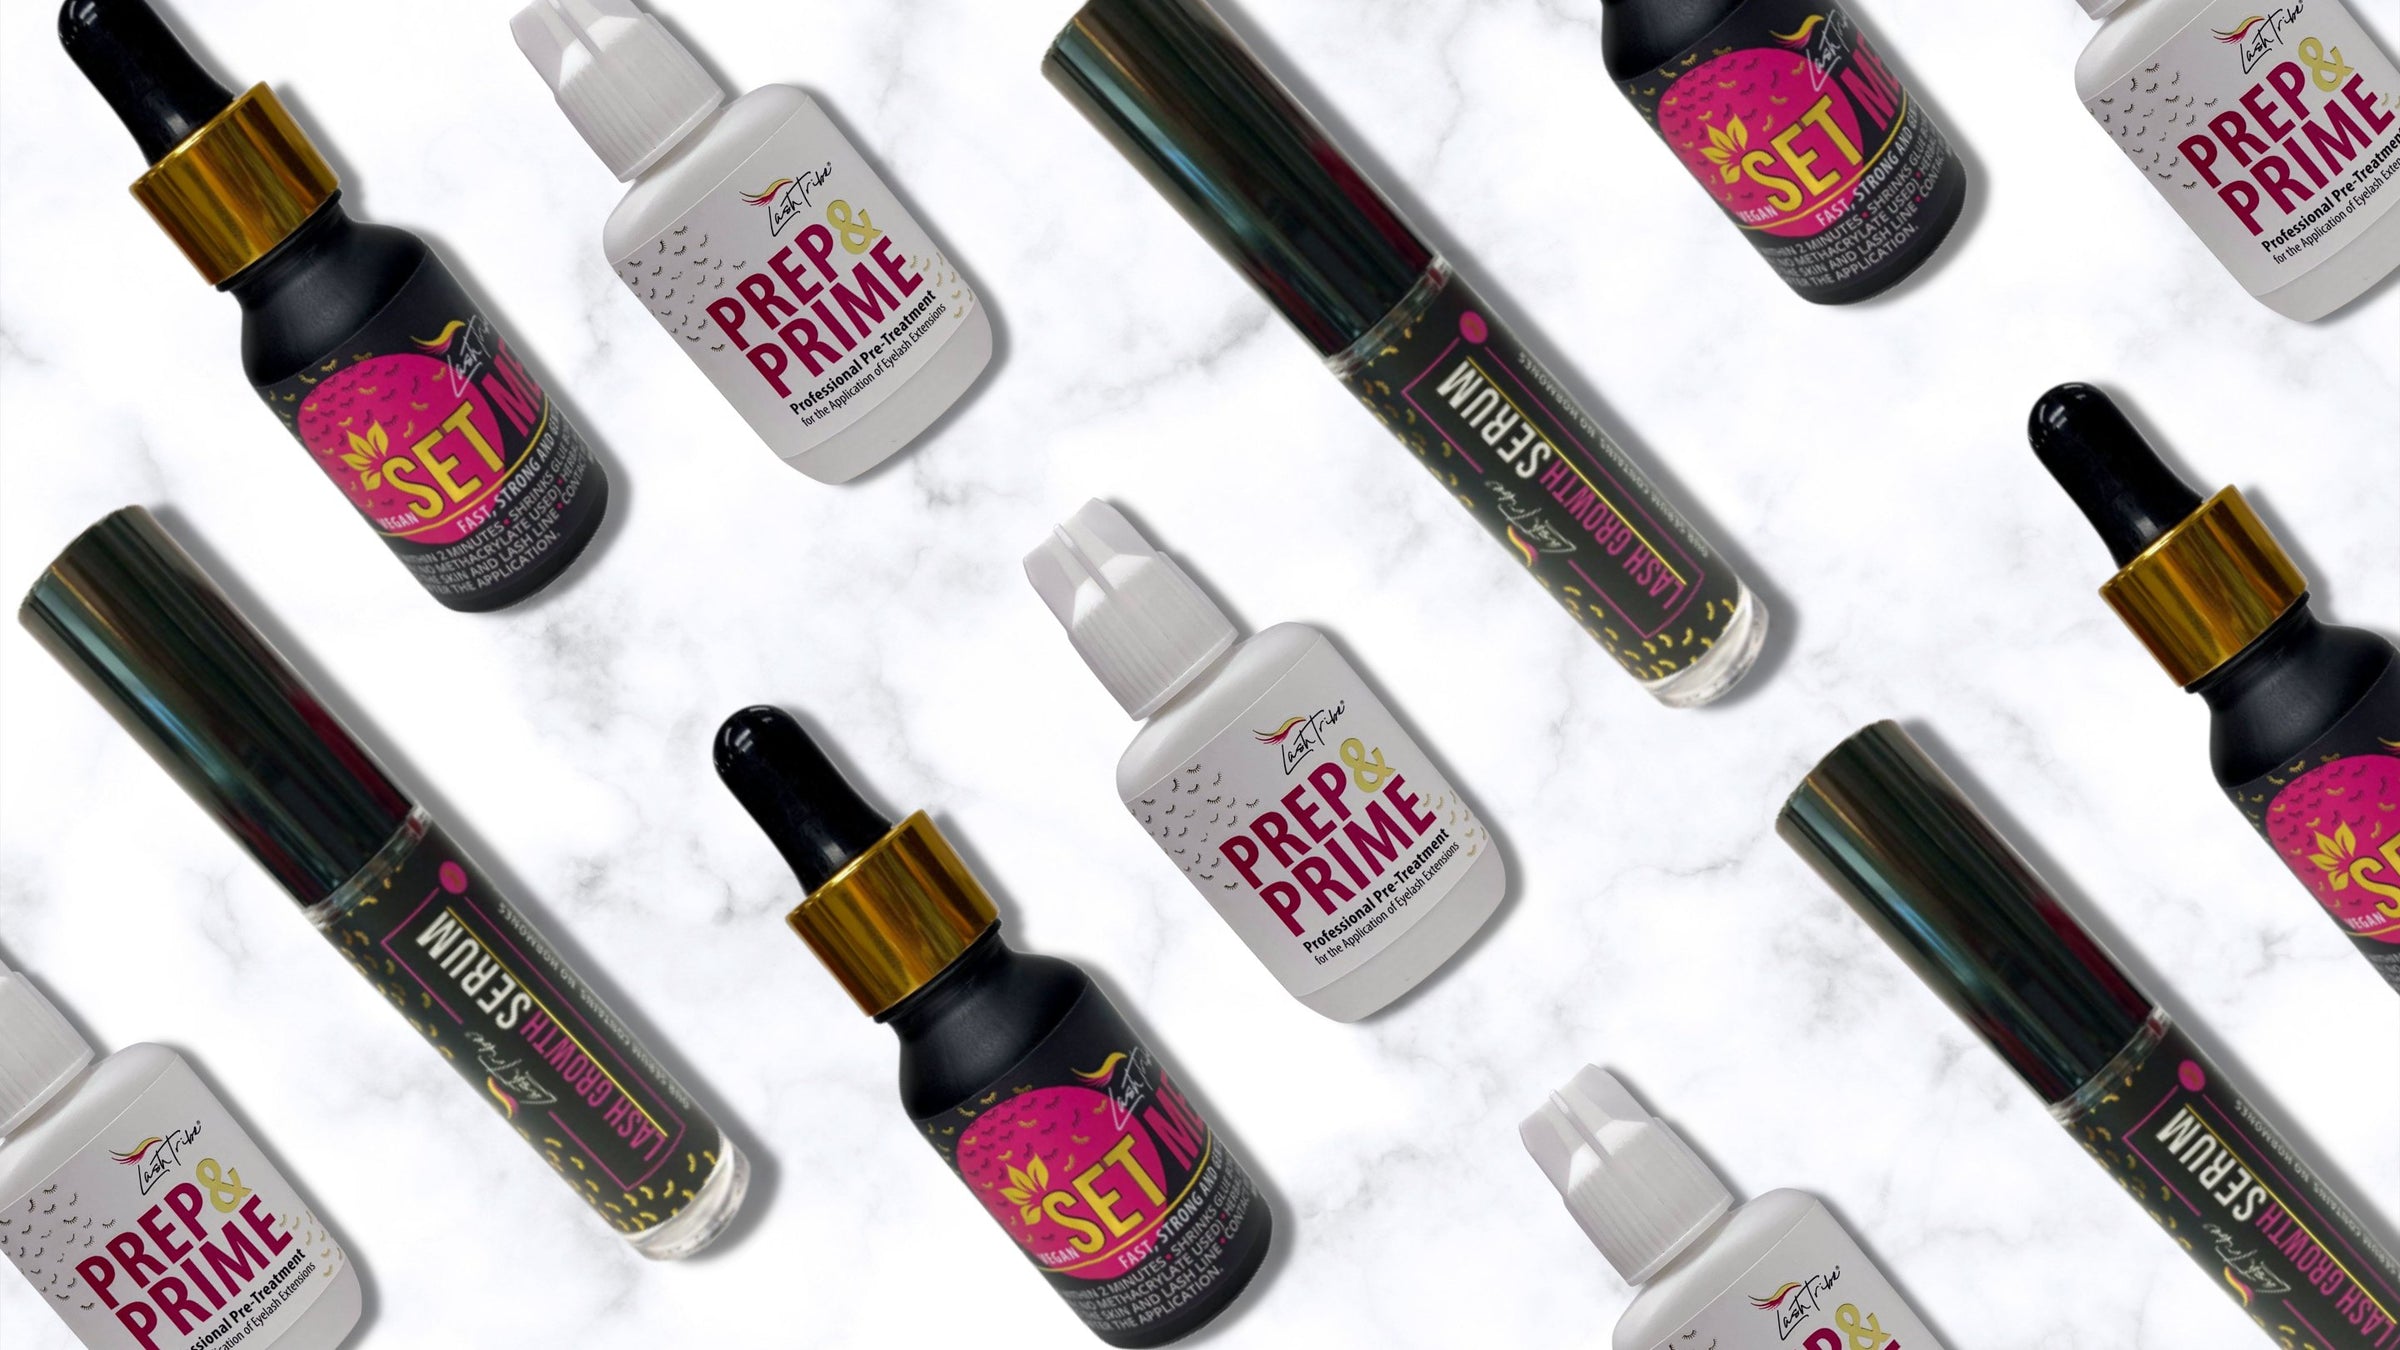 The best cbd oil products of 2019.